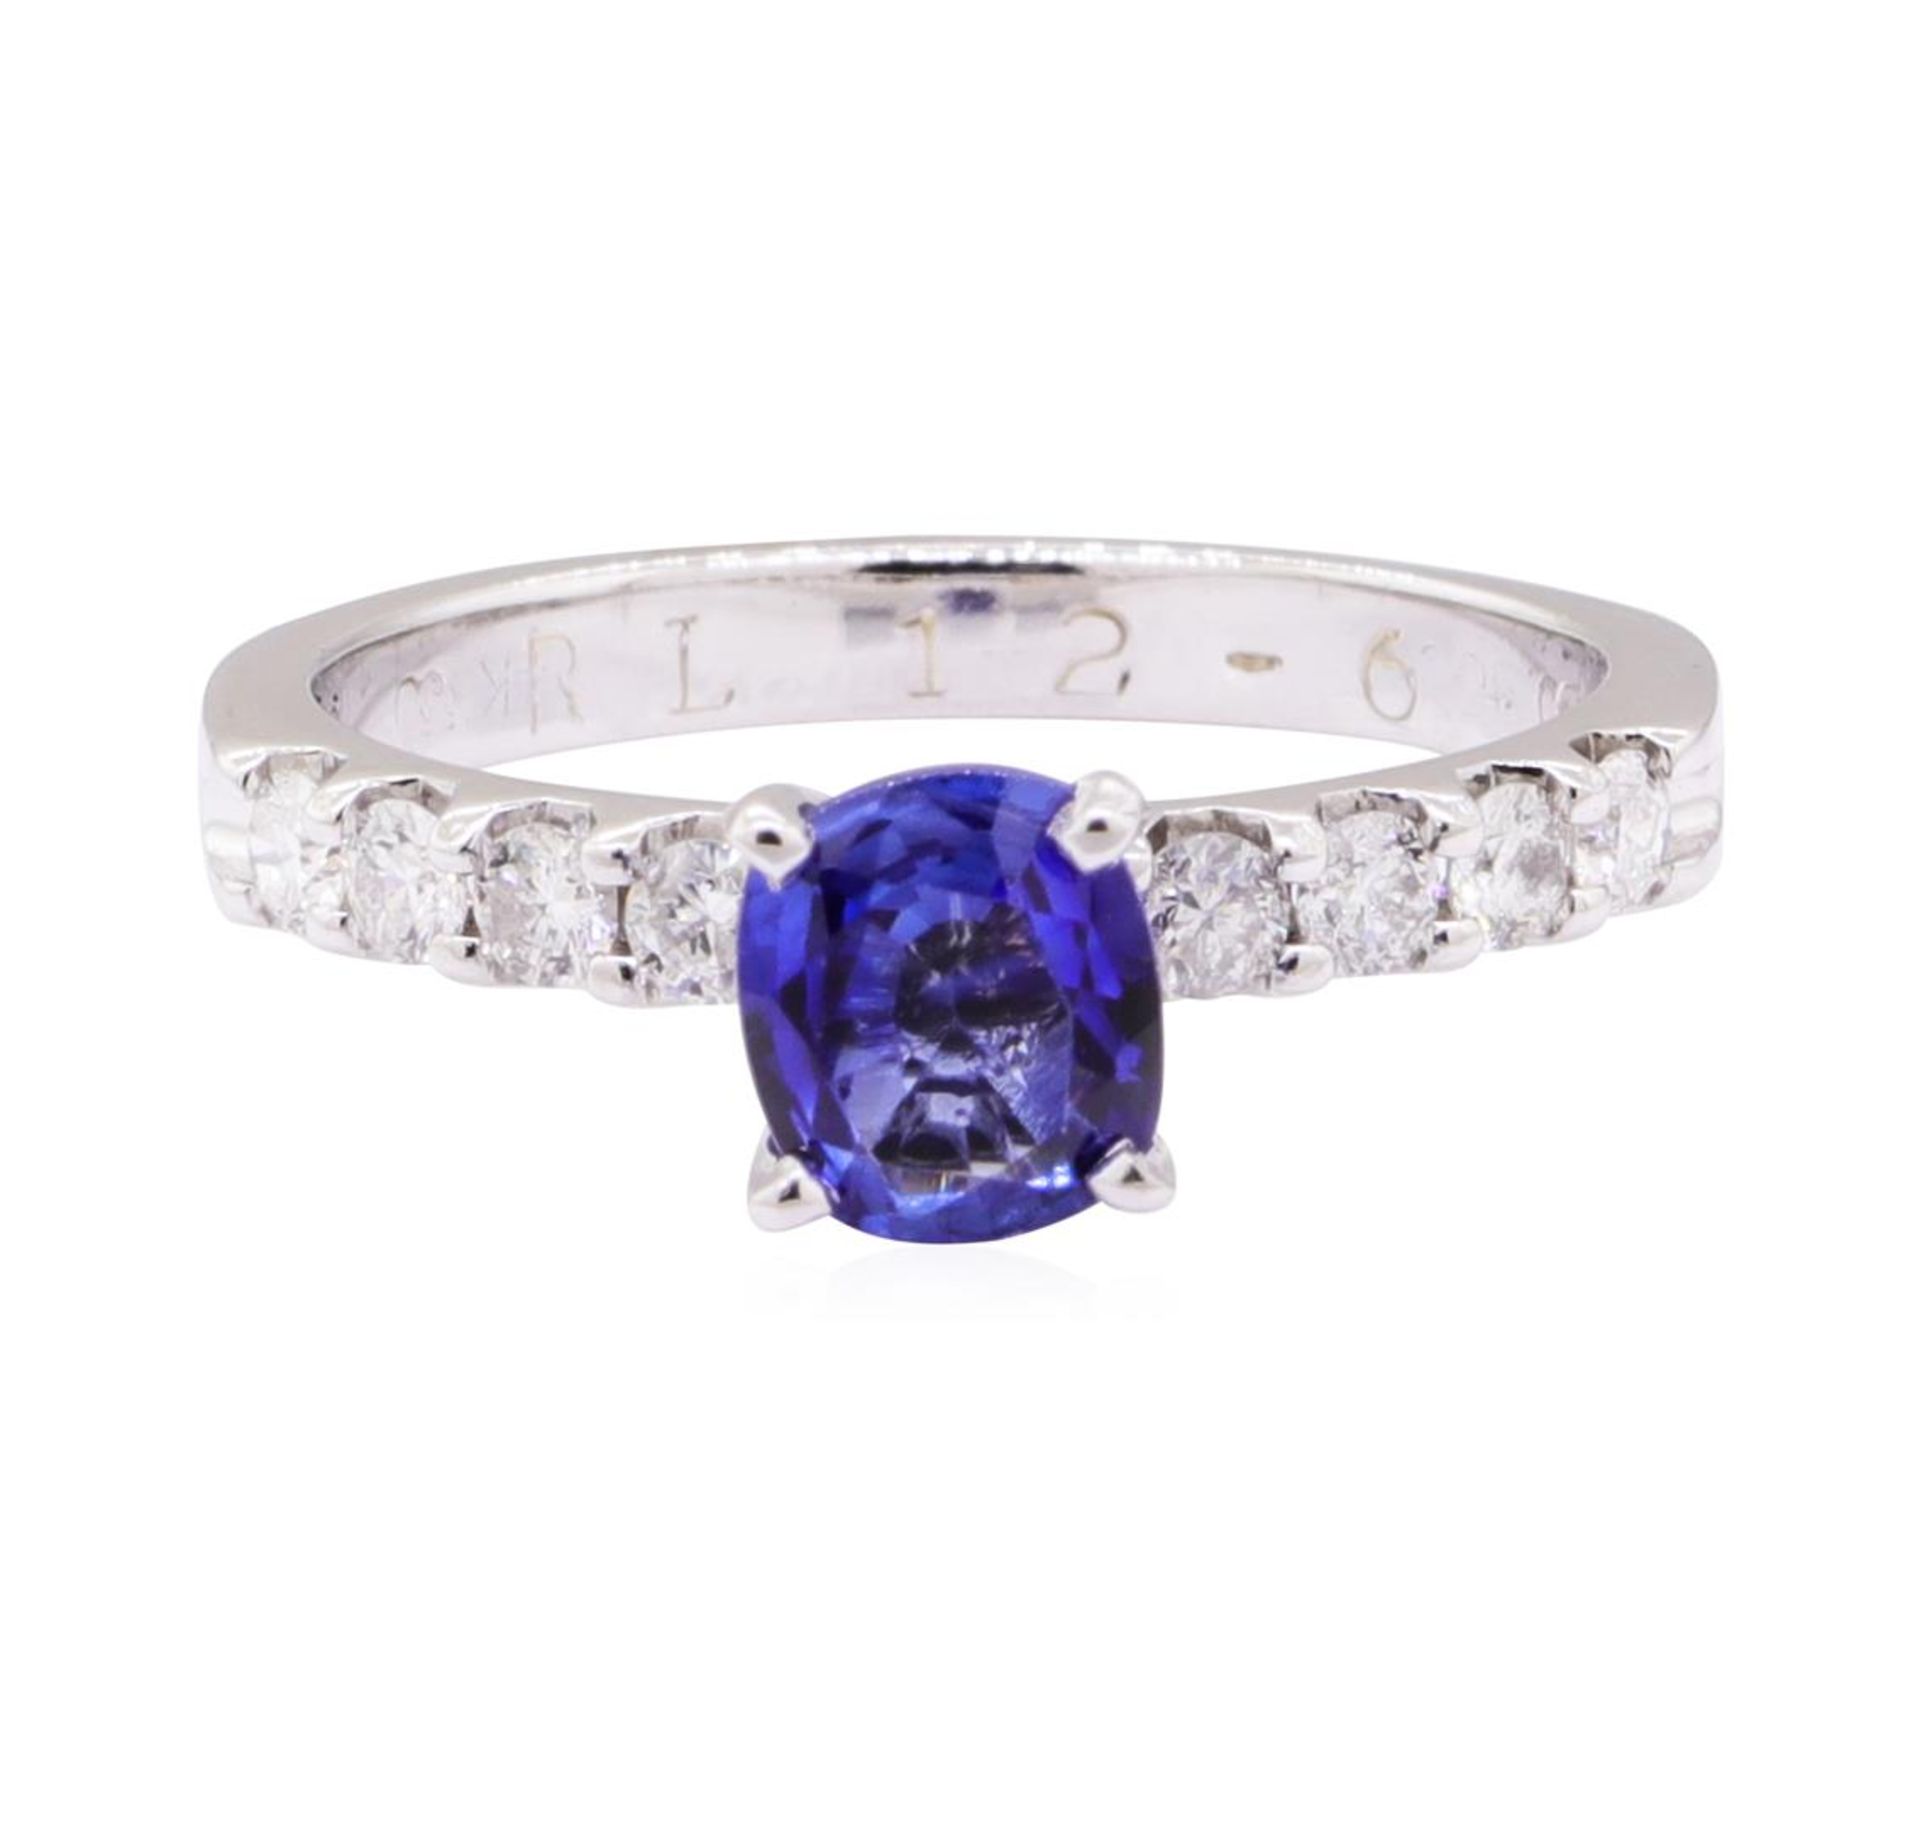 1.11ctw Blue Sapphire and Diamond Ring - 14KT White Gold - Image 2 of 4